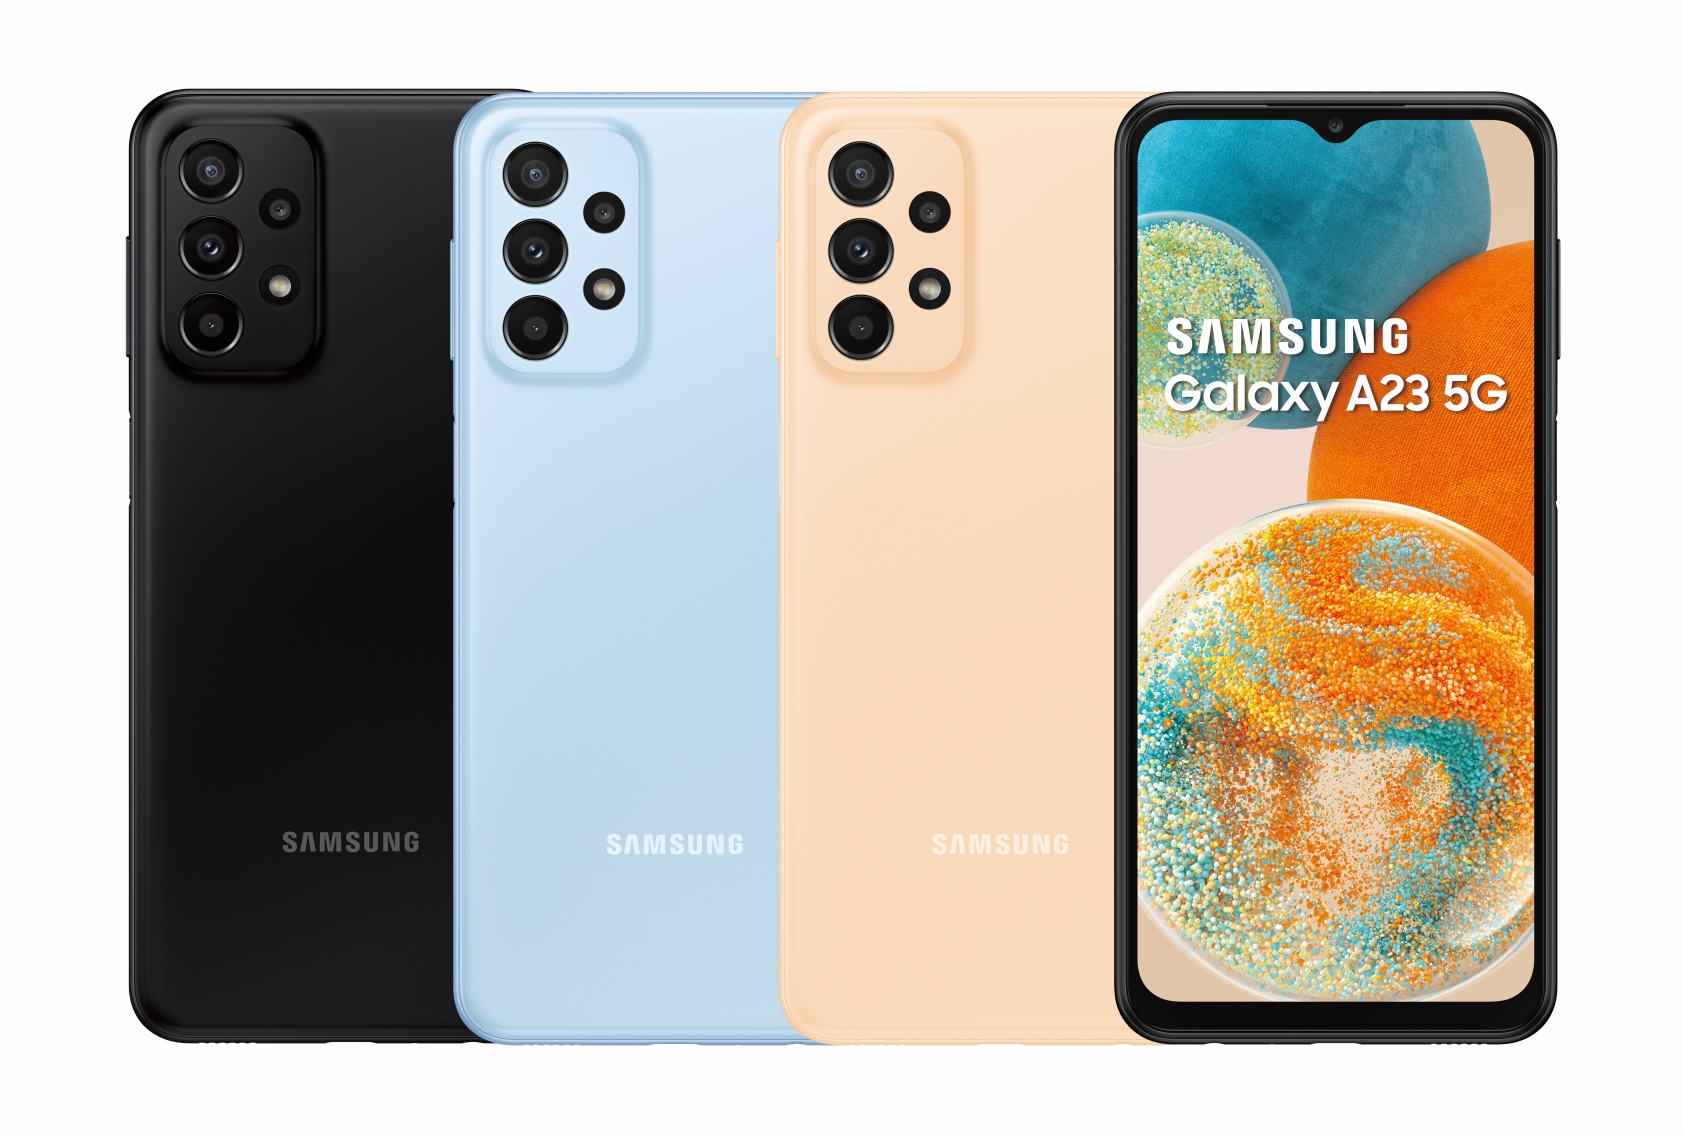 Samsung confirms Galaxy A23 5G release date, price, wall charger